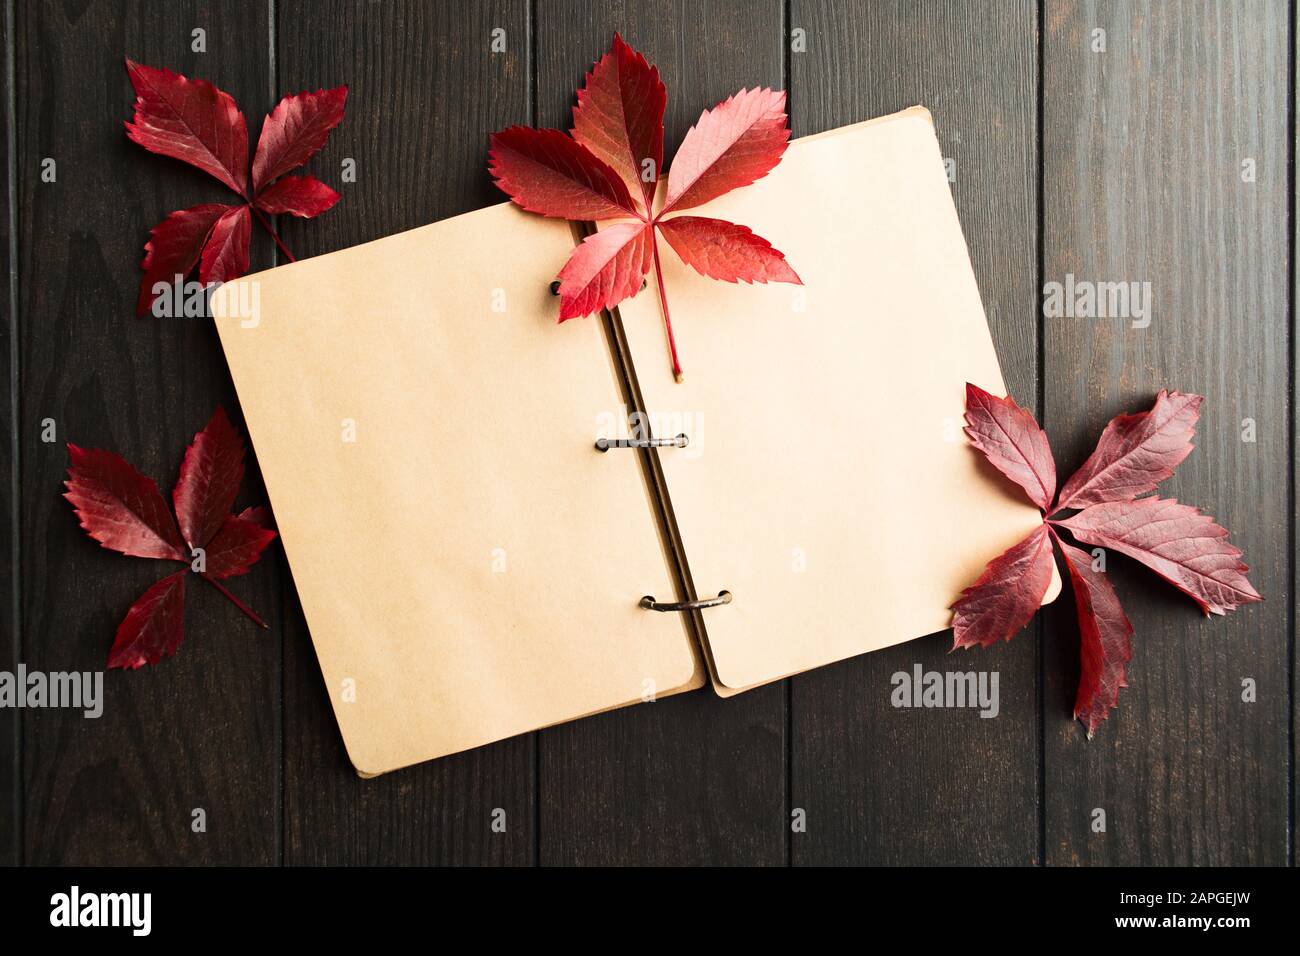 Empty open craft notebook with red atumn leaves of parthenocissus over brown wooden table. Copy space. Top view, flat lay Stock Photo